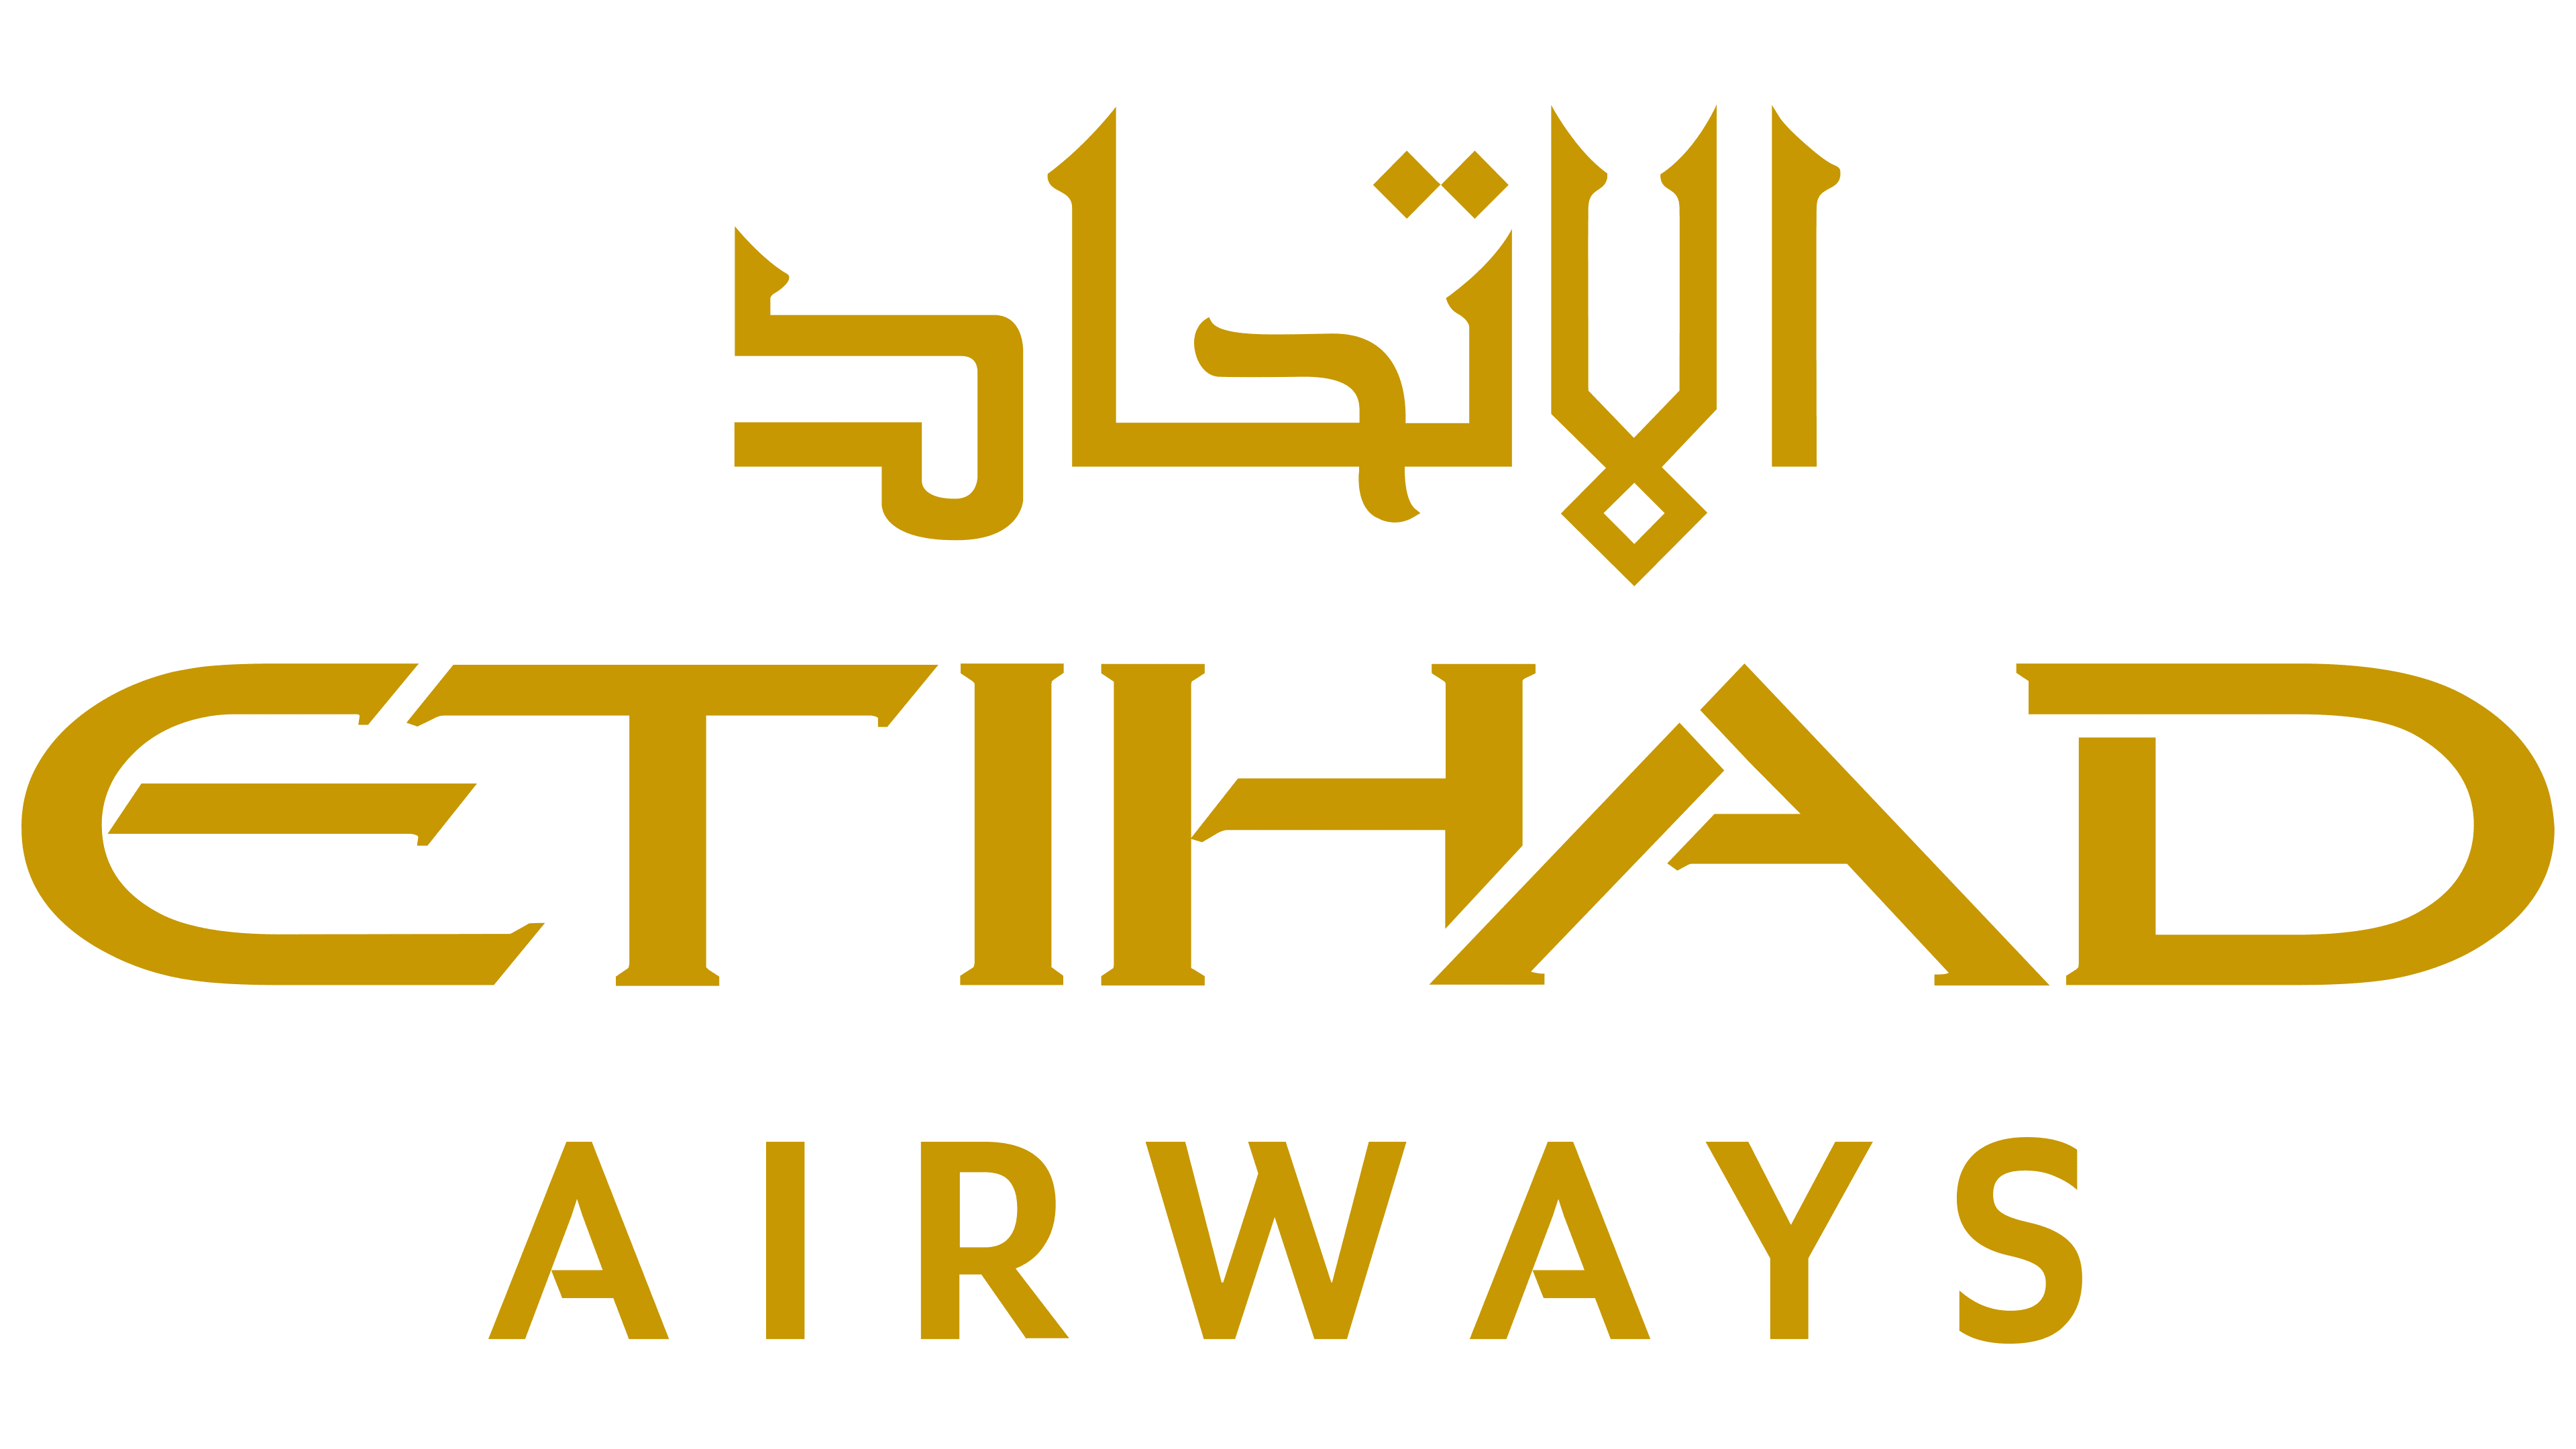 https://adgully.me/post/4798/etihad-airways-pioneers-cutting-edge-artificial-intelligence-solutions